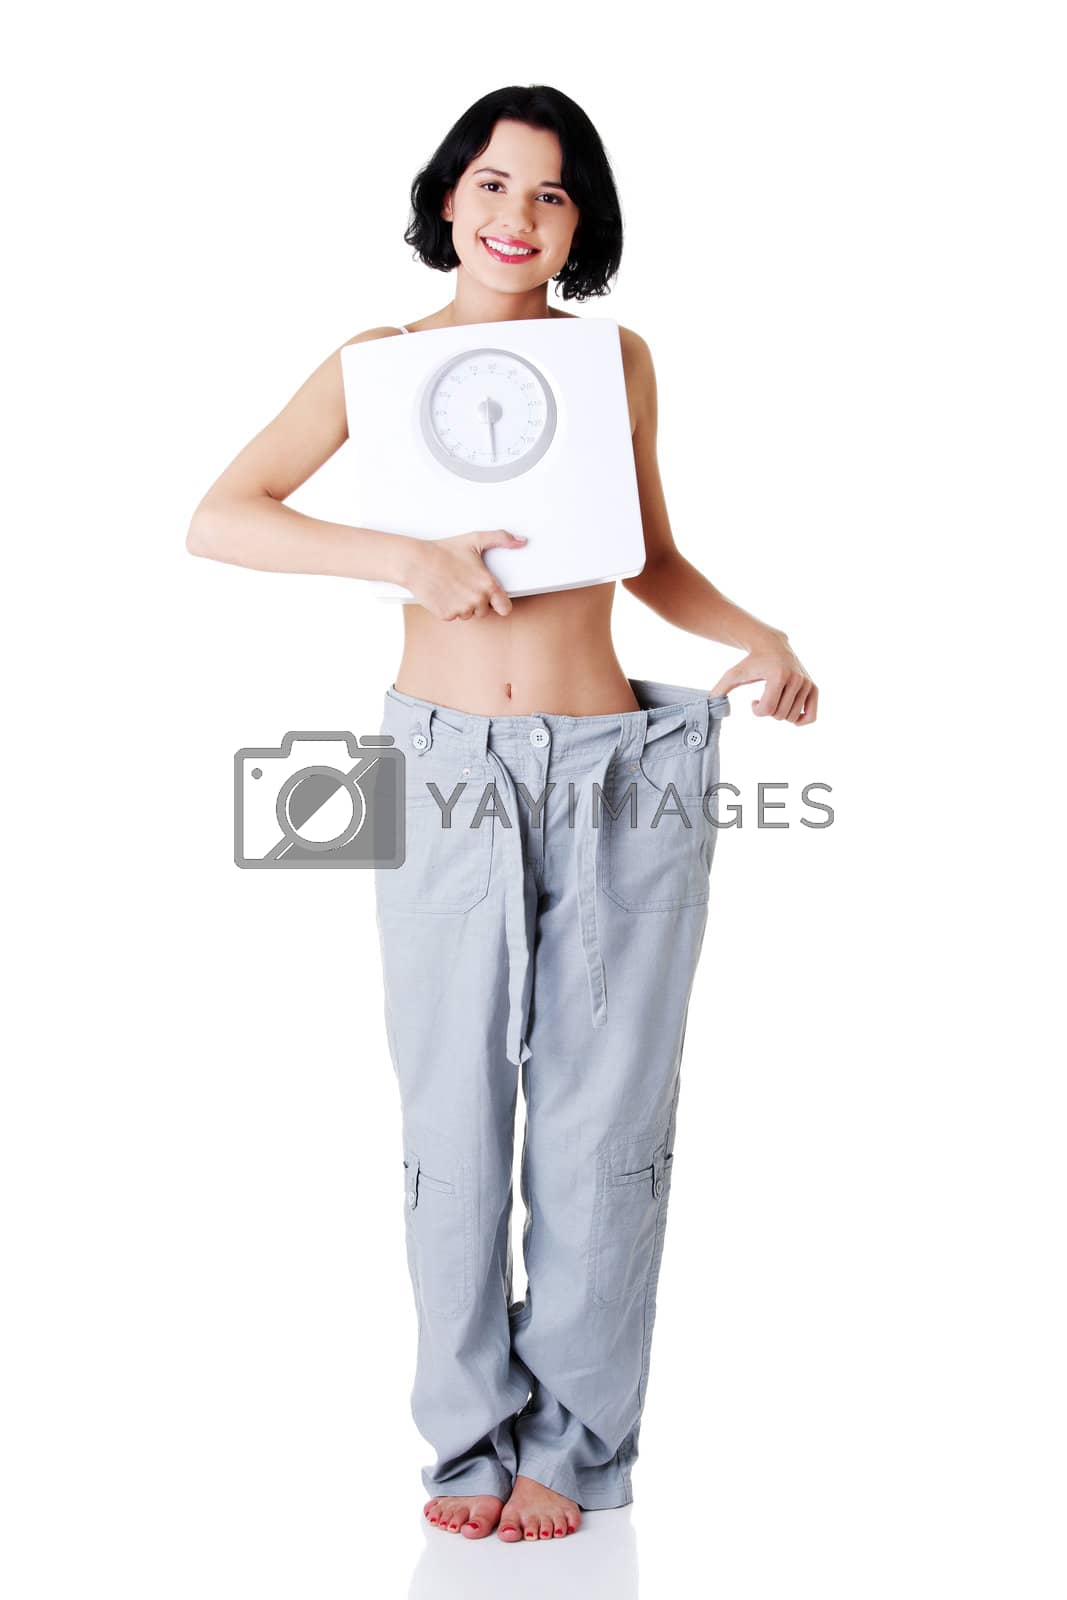 Royalty free image of Diet concept by BDS